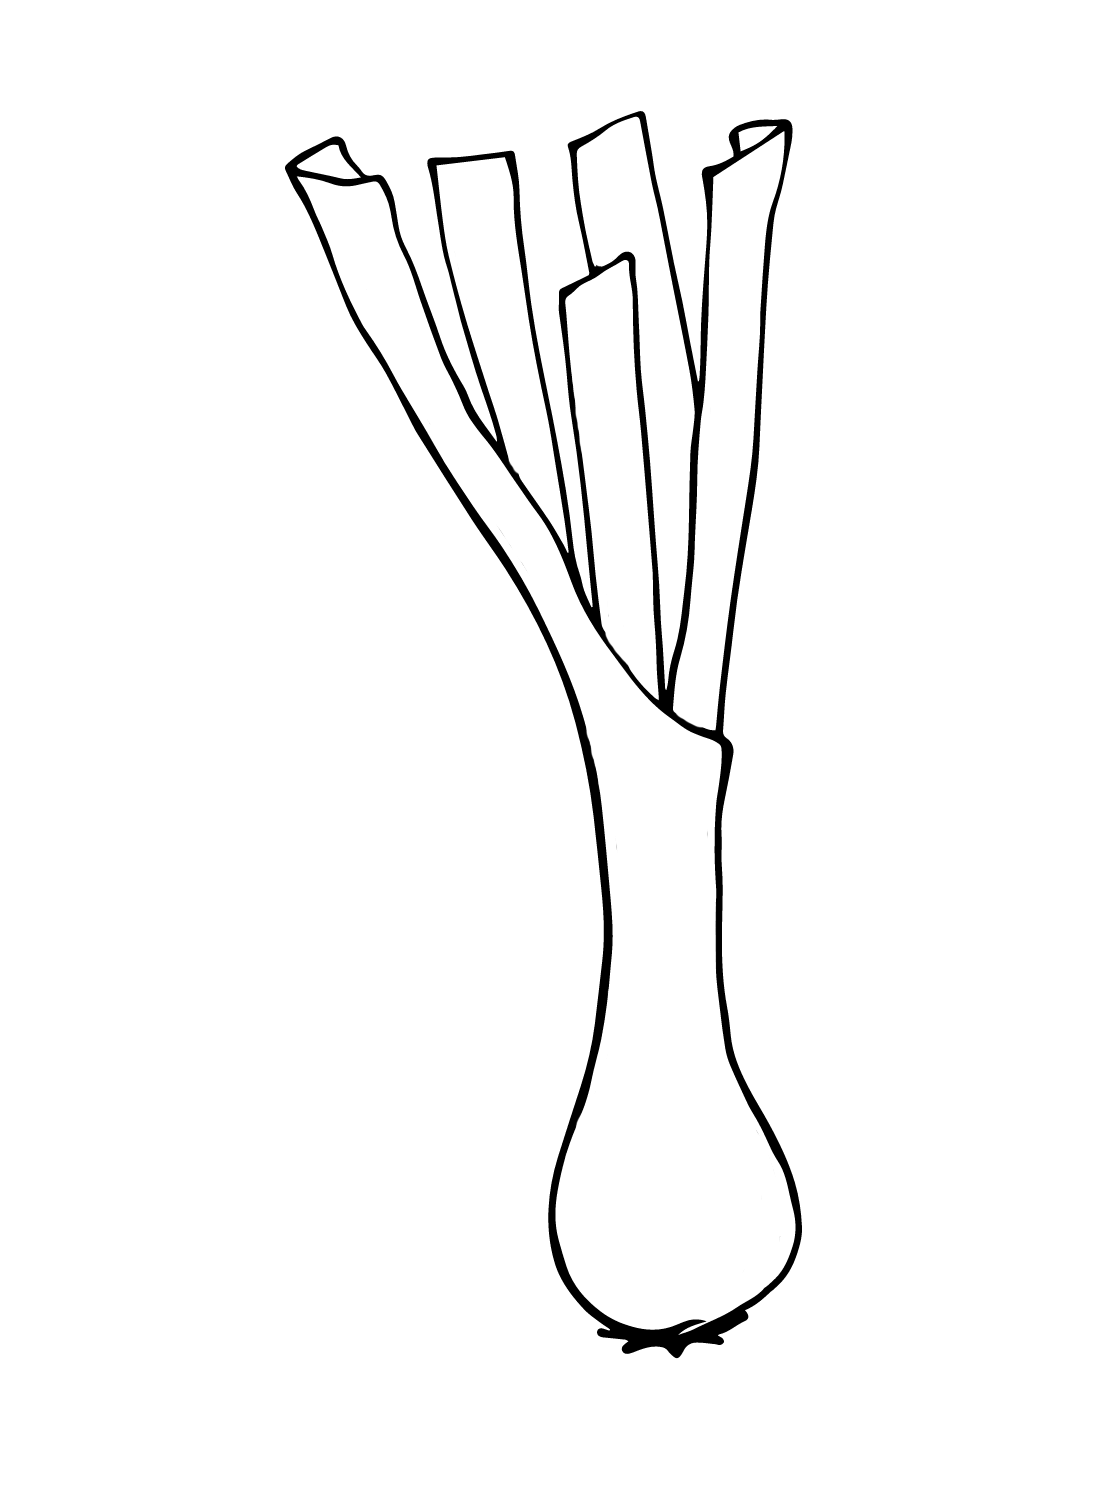 Leek Pictures Coloring Page